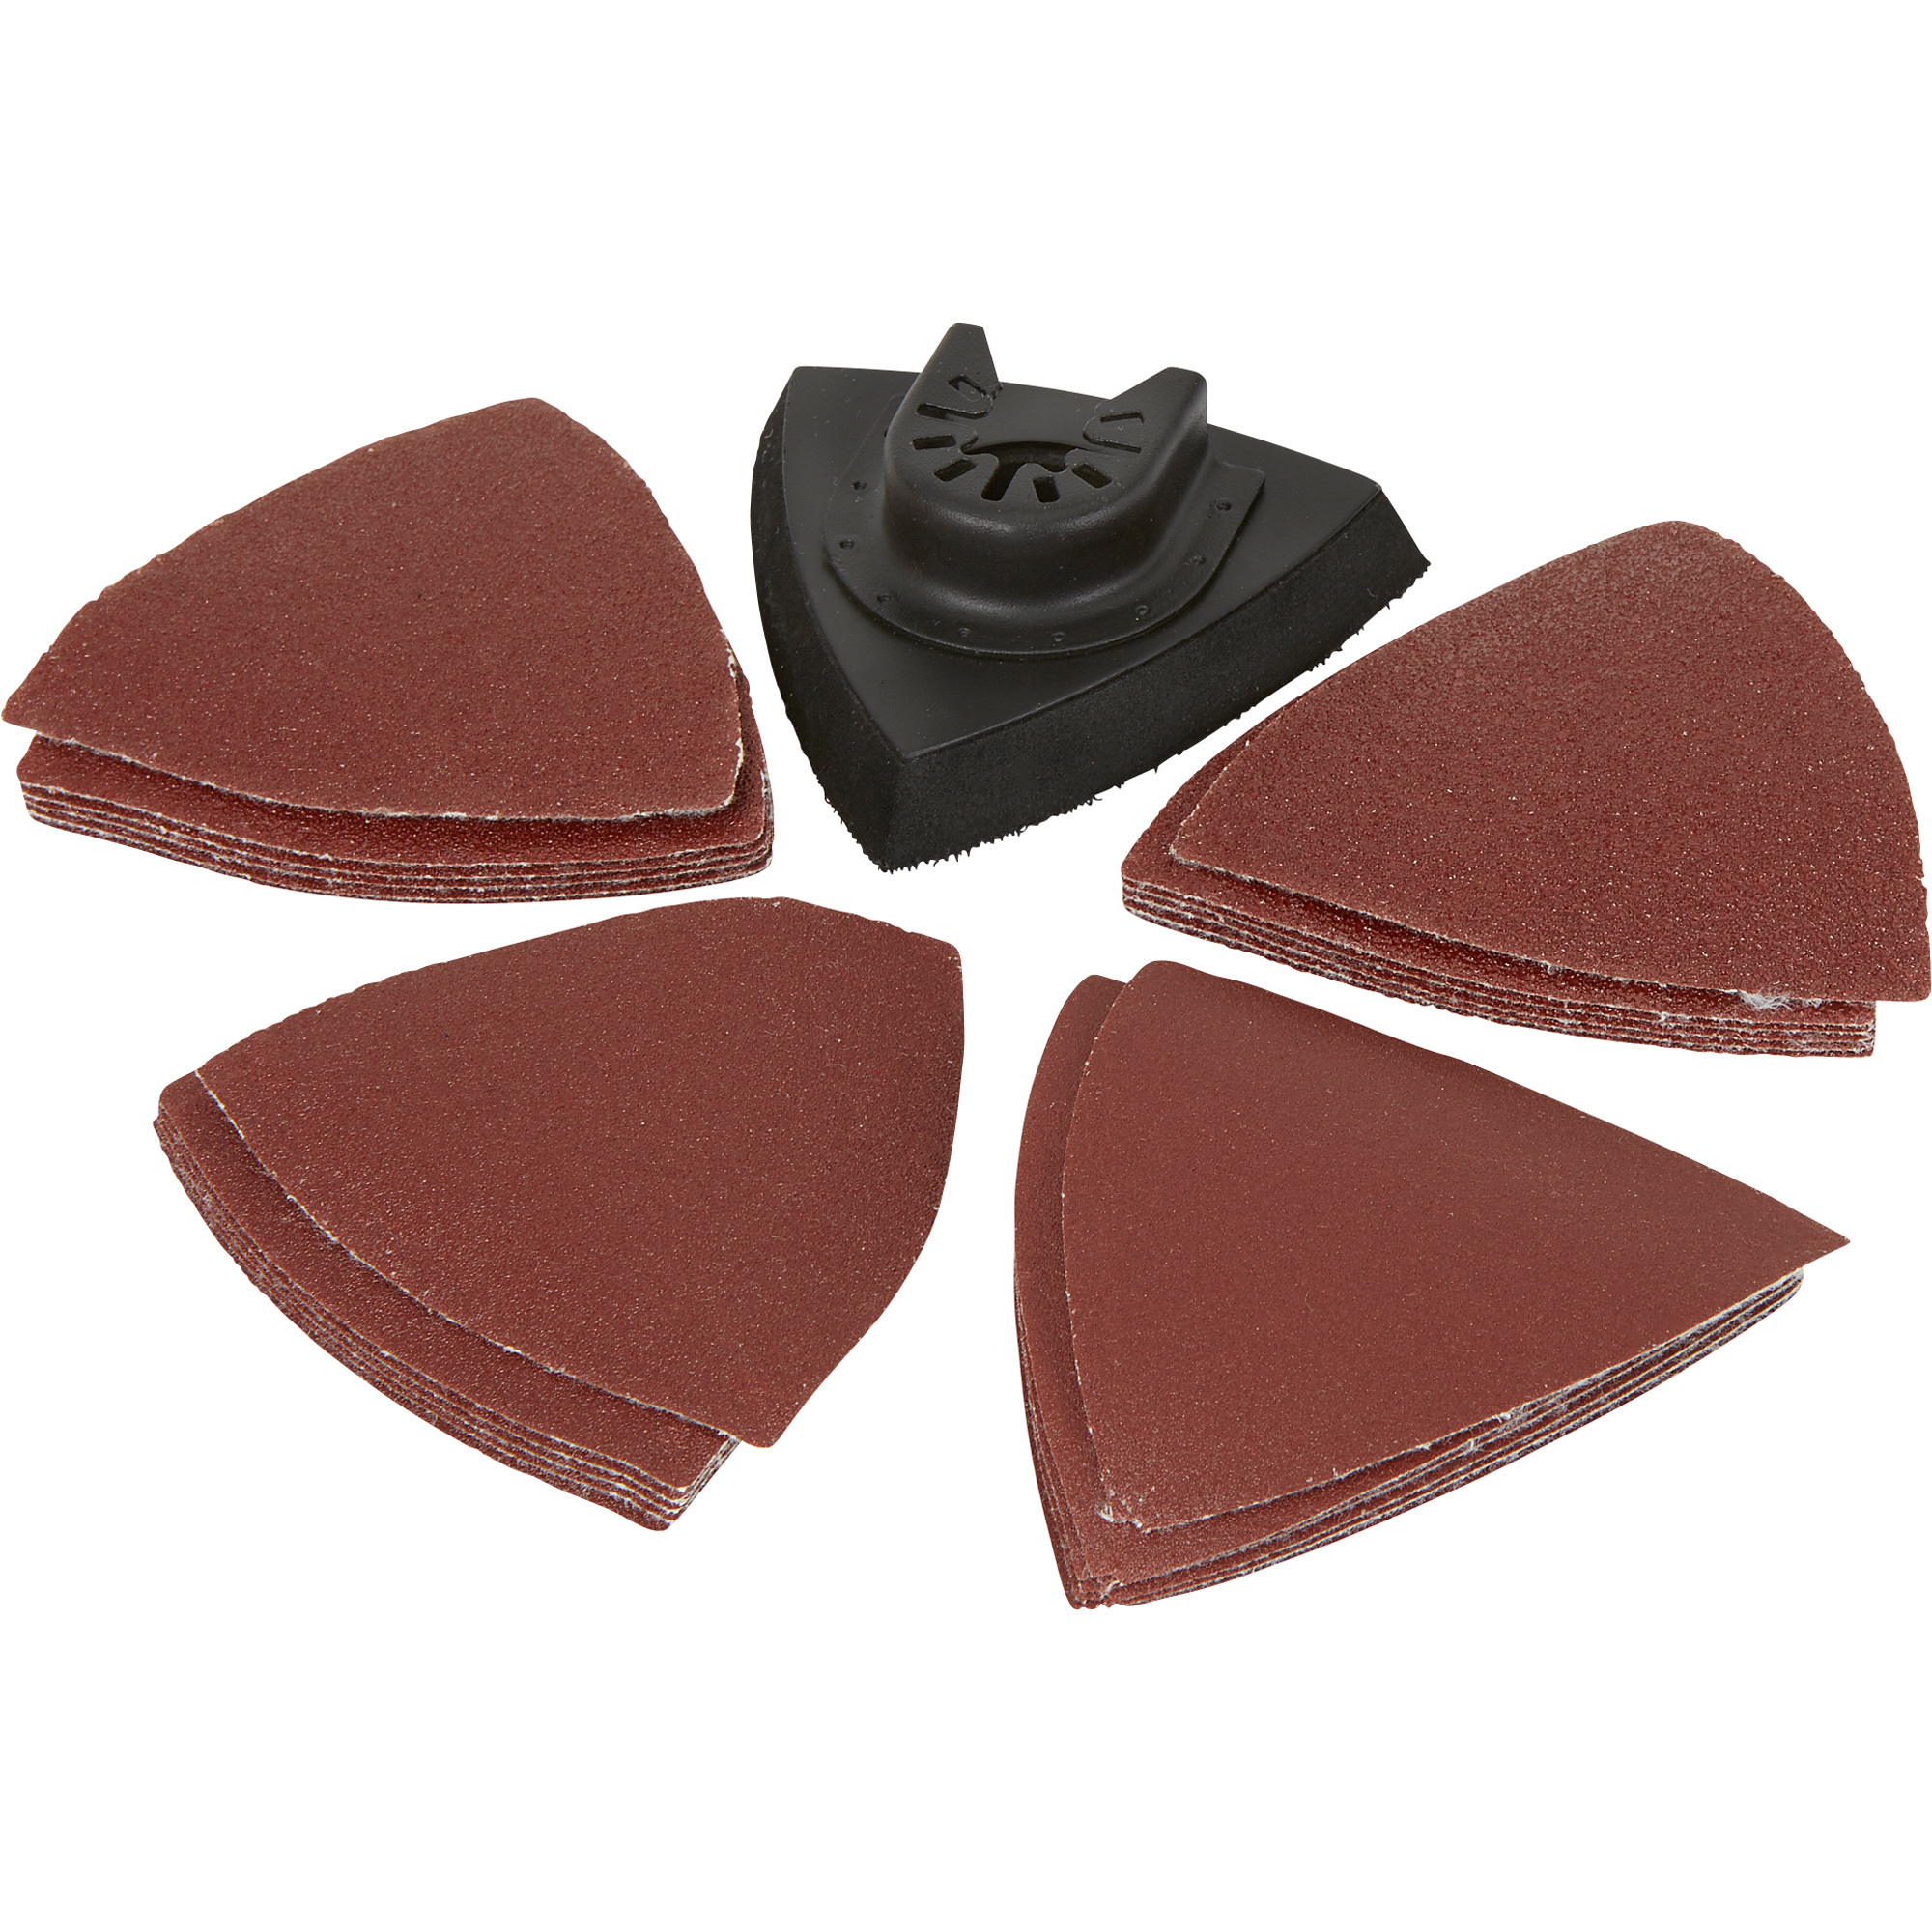 Ironton Replacement Sandpaper Kit for Oscillating Tool, 25-Piece